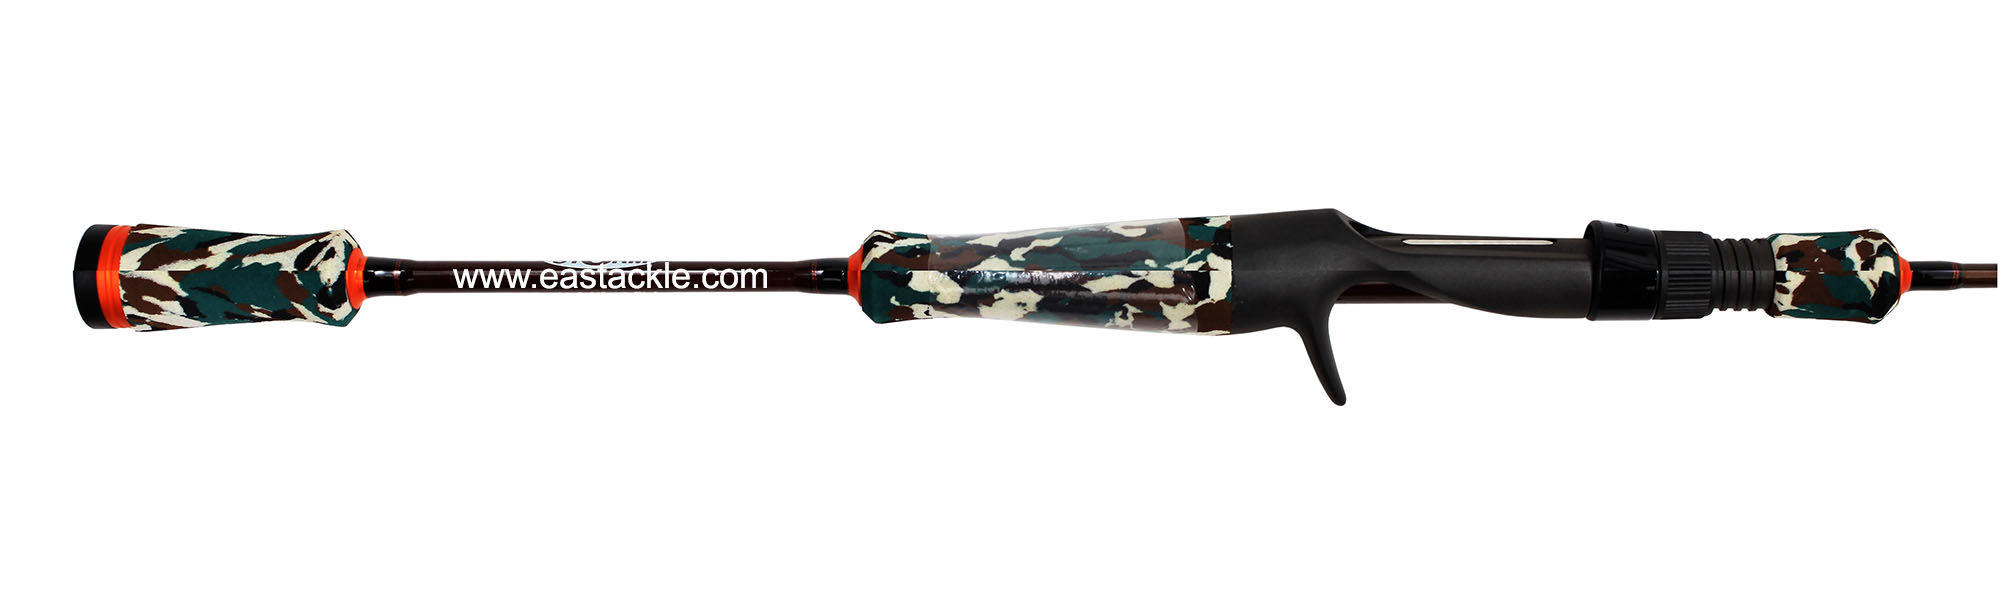 Storm - Discovery - DVC602UL - Bait Casting Rod - Handle Section (Side View) | Eastackle